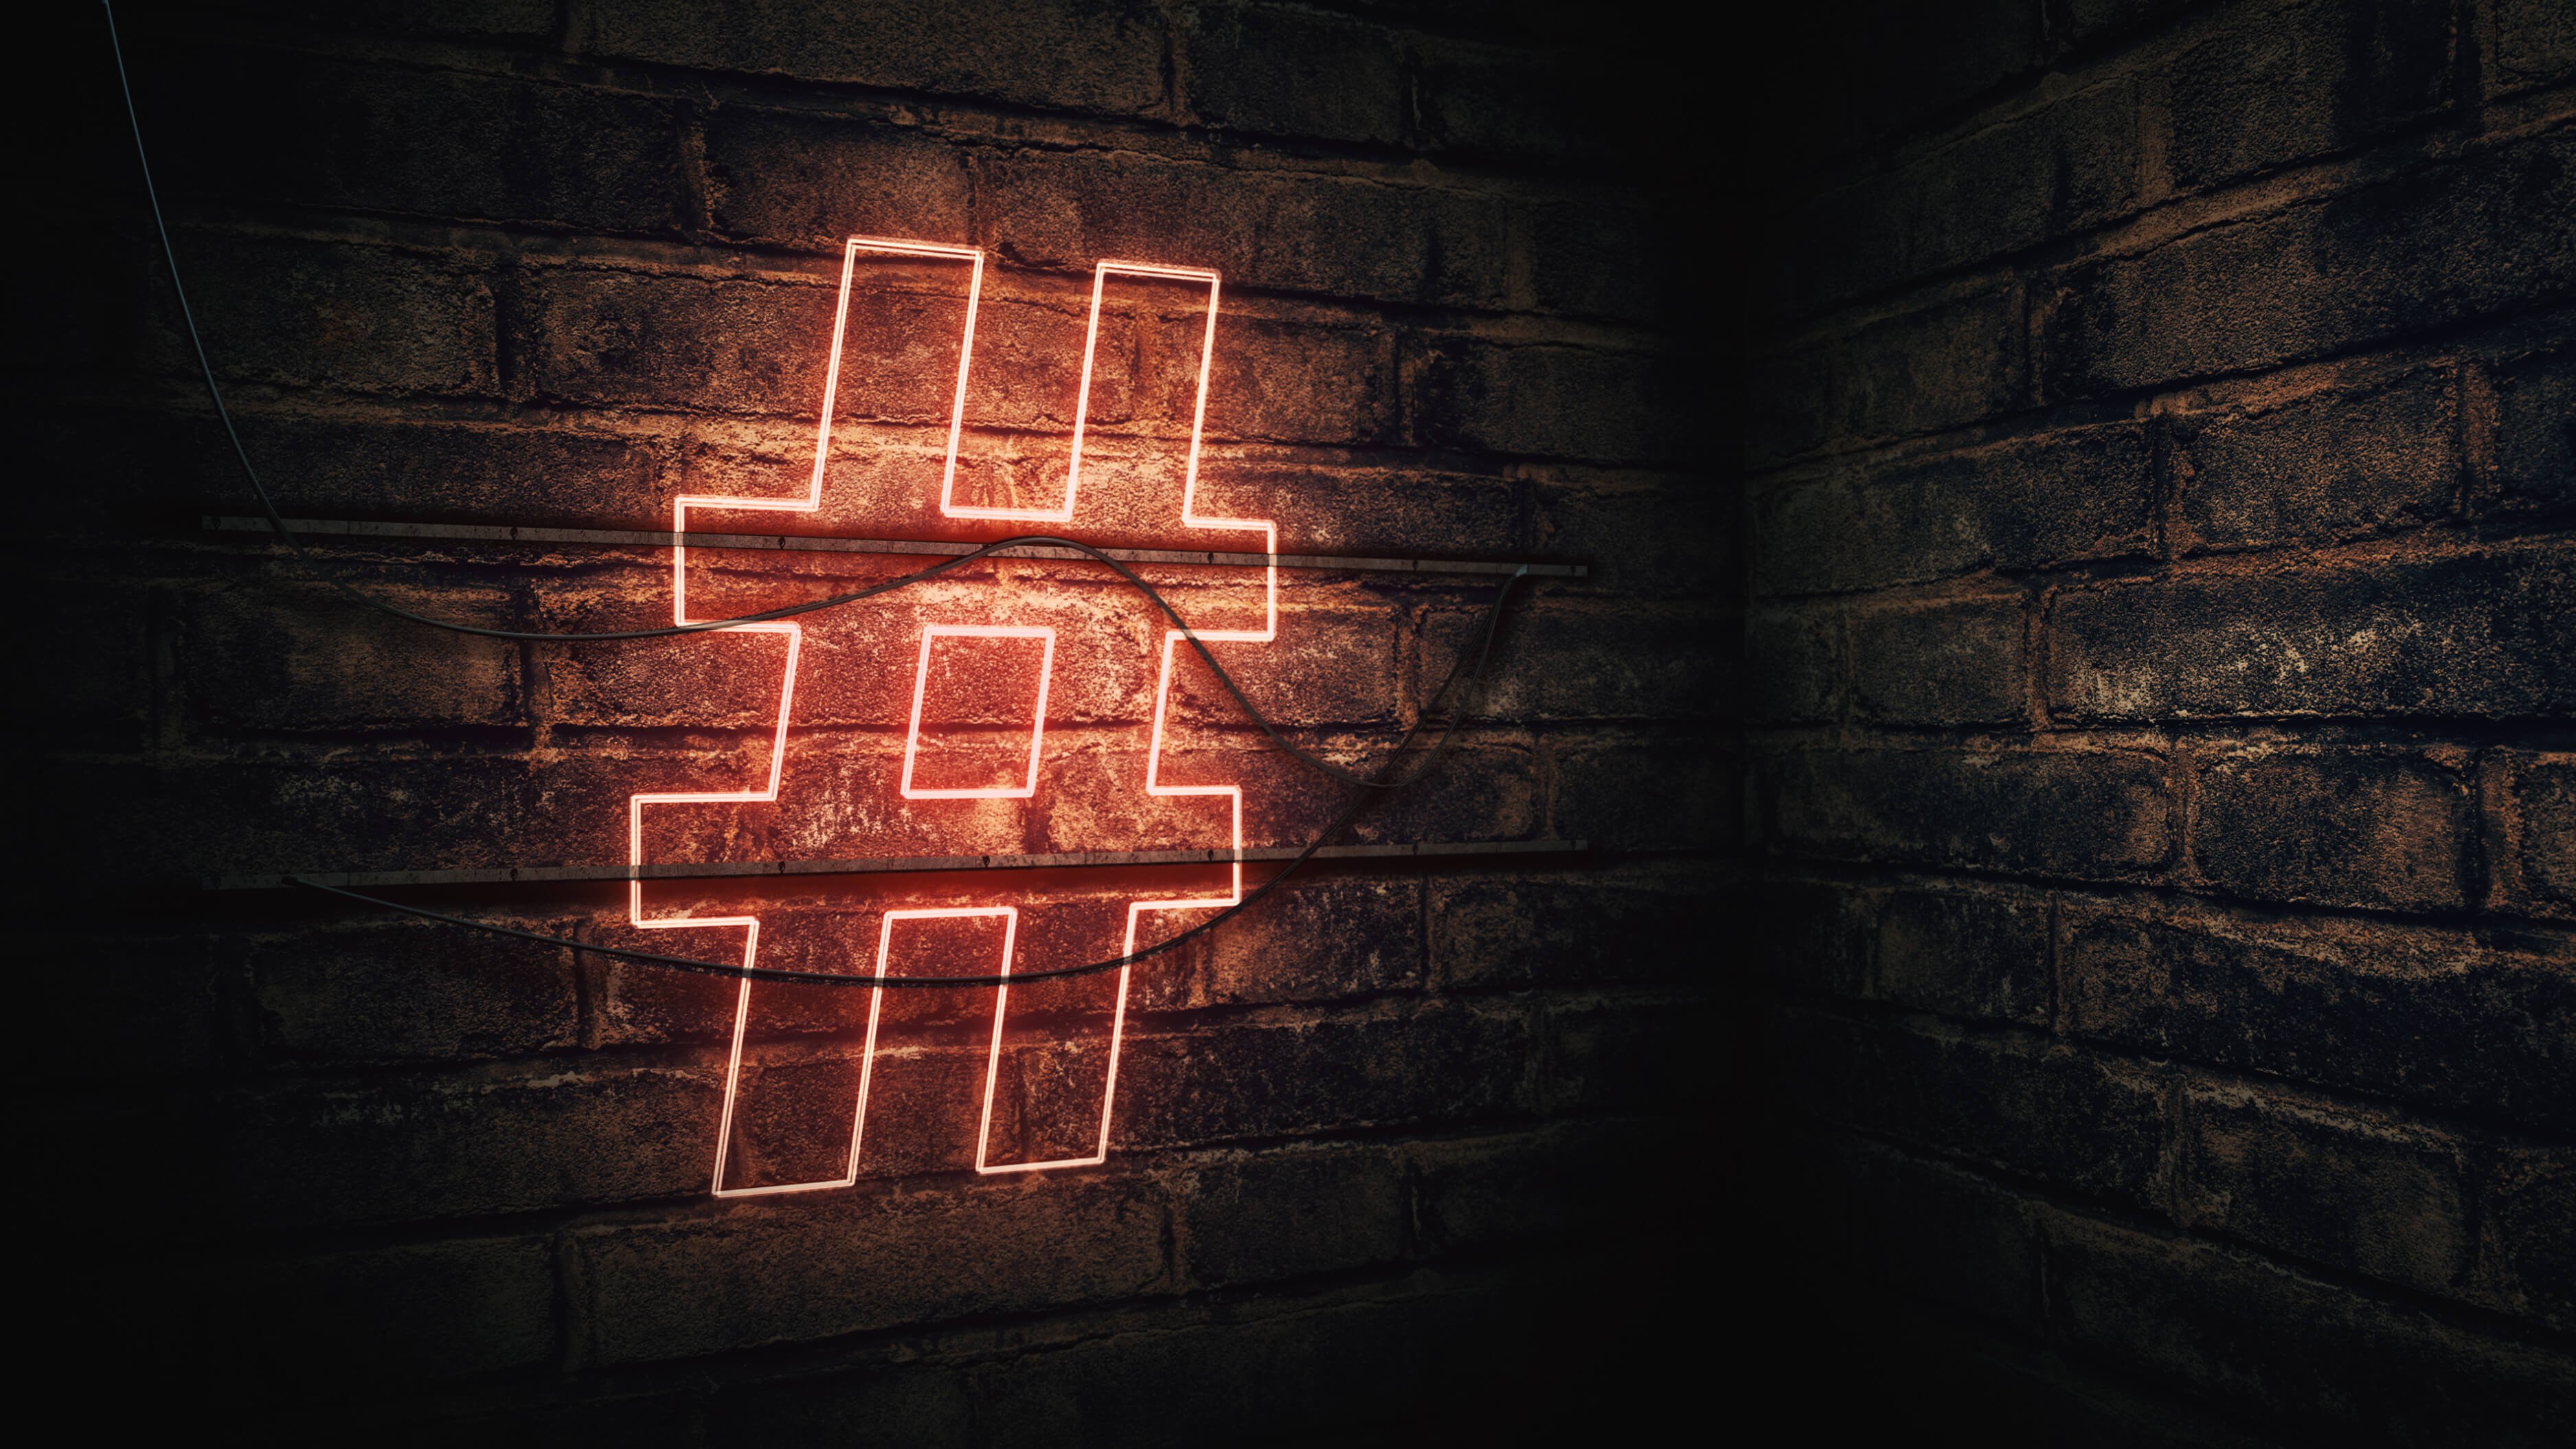 Neon hashtag sign on brick wall